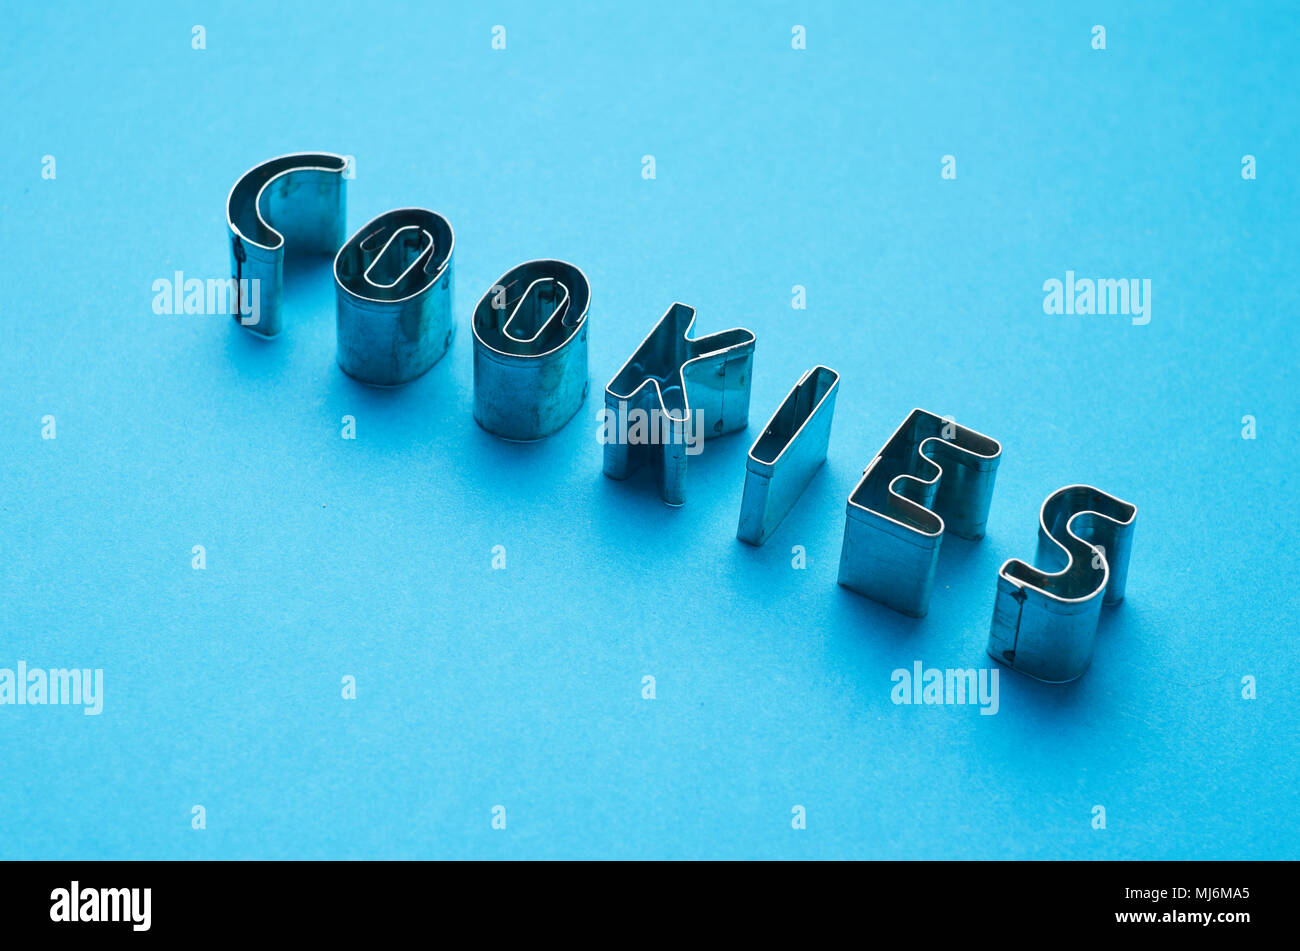 Cookies word written with cookie cutters molds over blue background Stock Photo